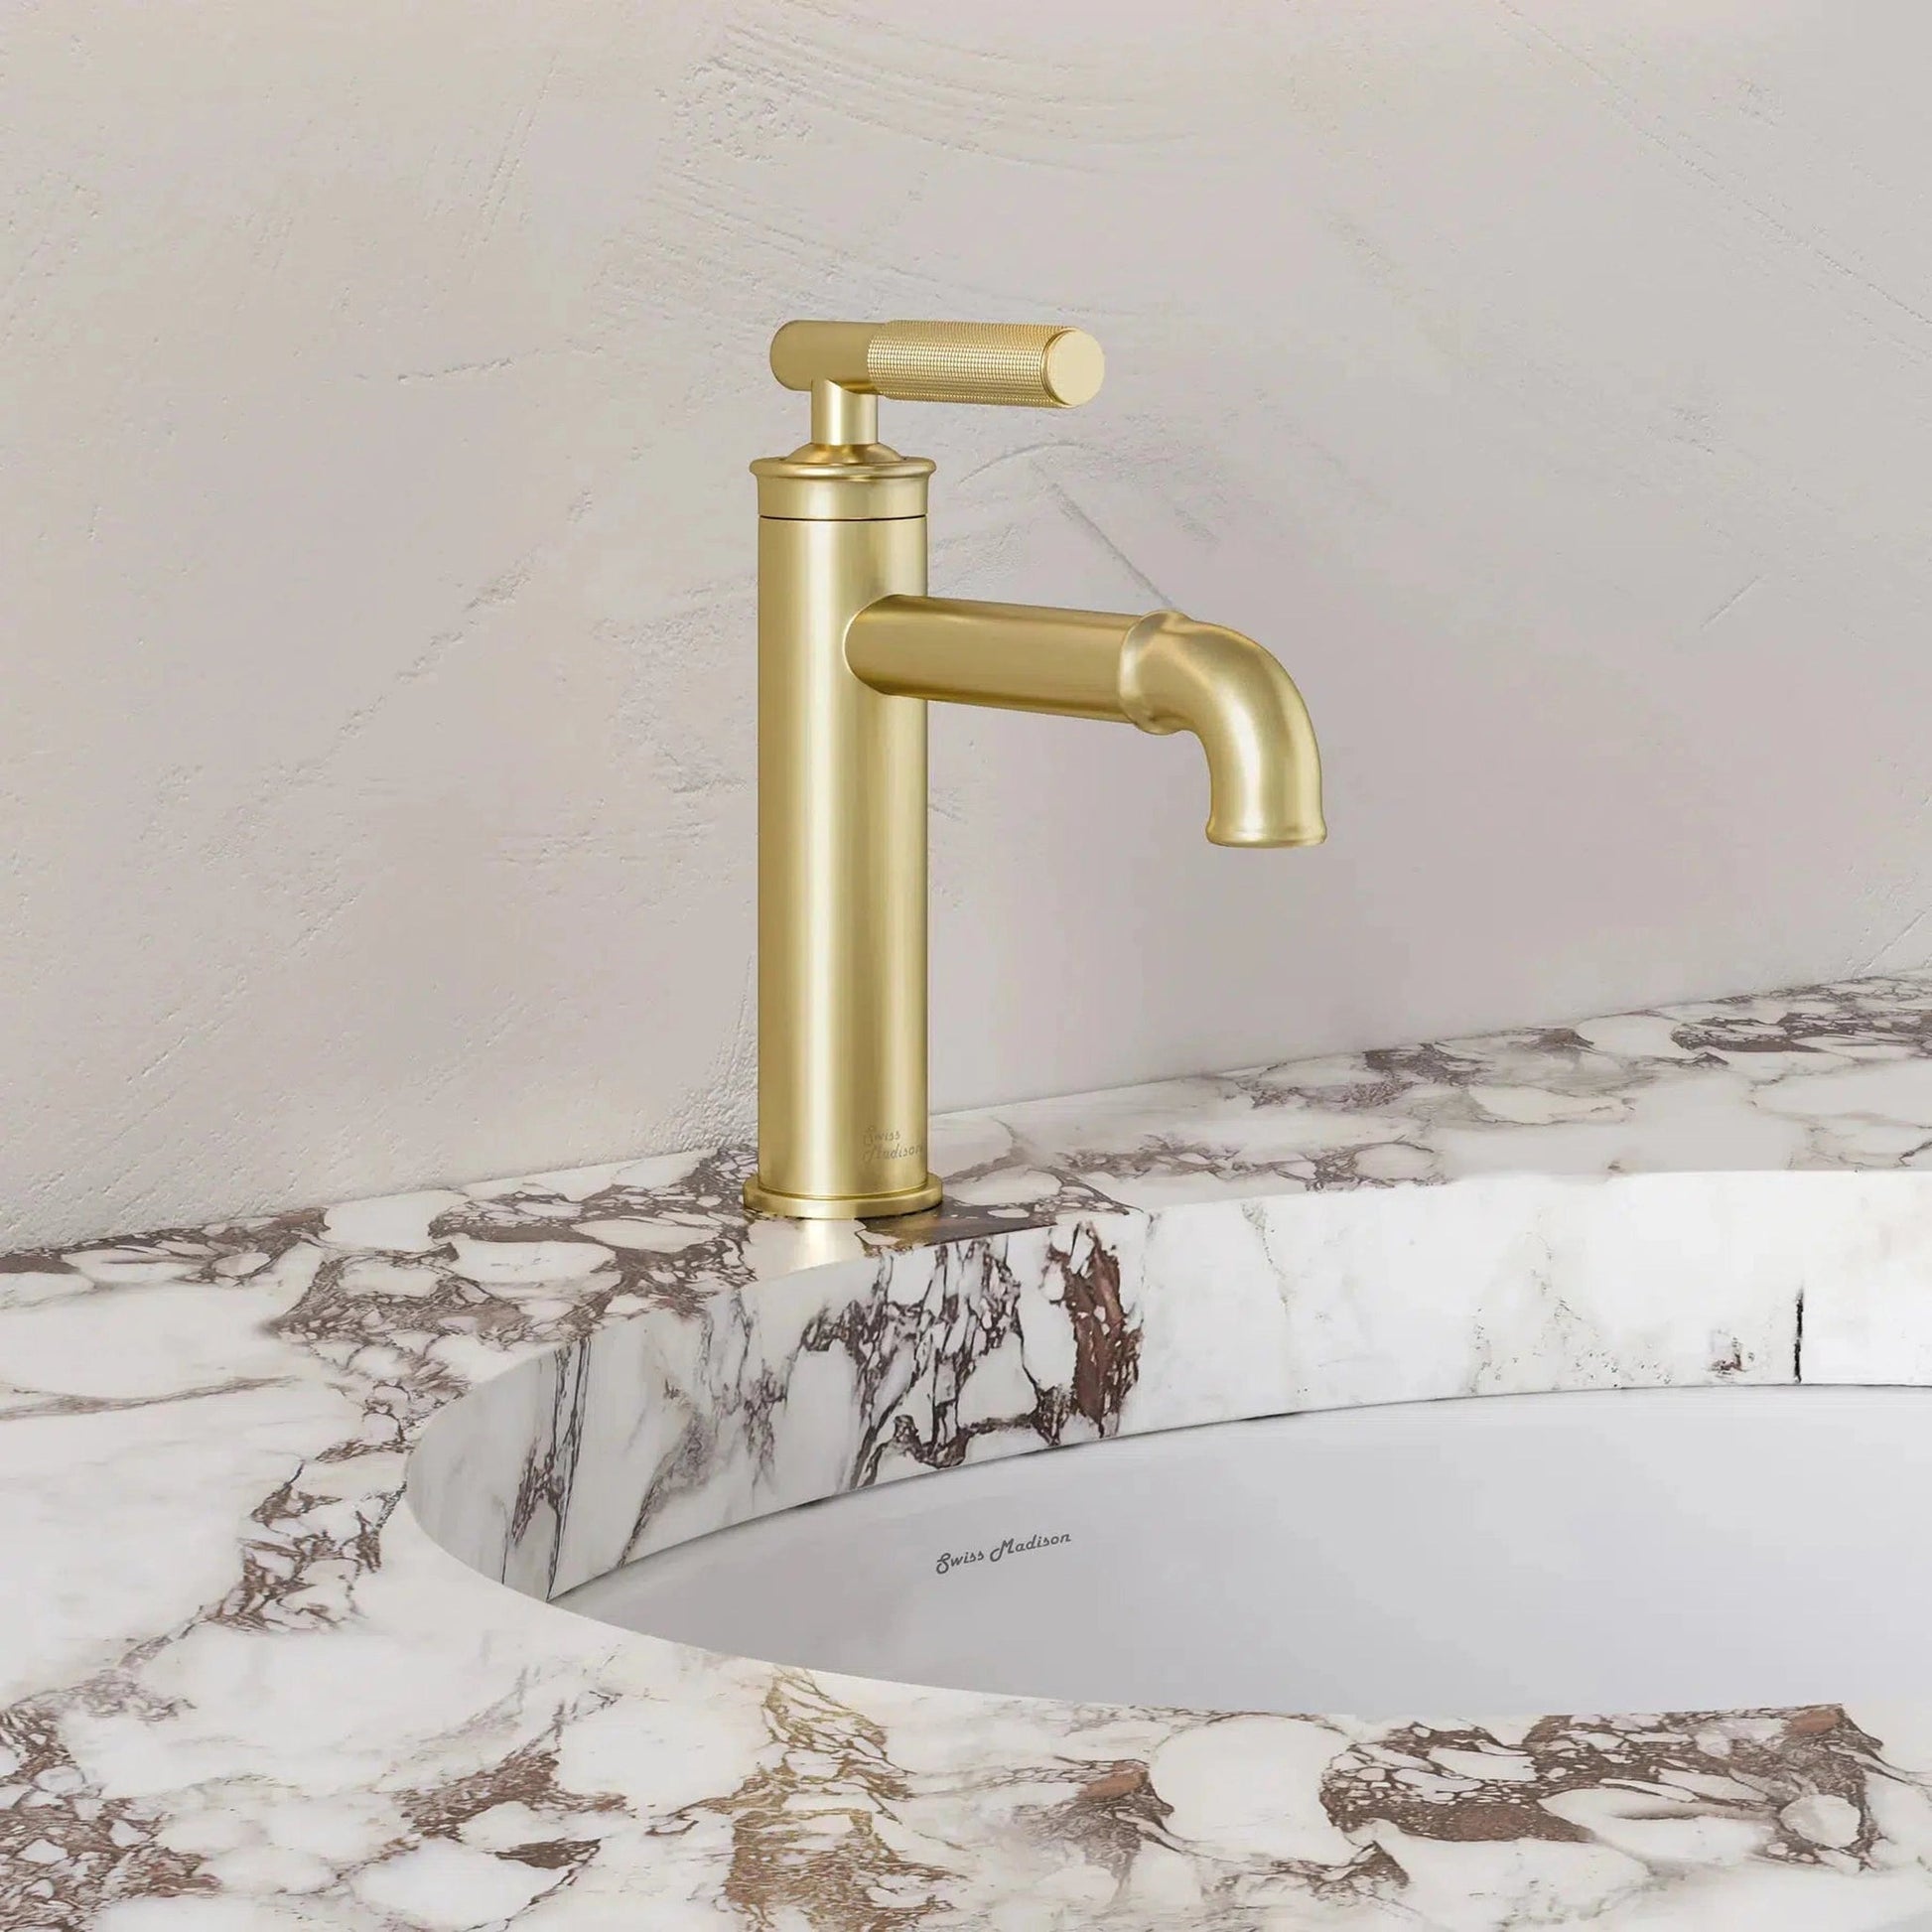 Swiss Madison Avallon 8" Single-Handle Brushed Gold Bathroom Faucet With 1.2 GPM Flow Rate